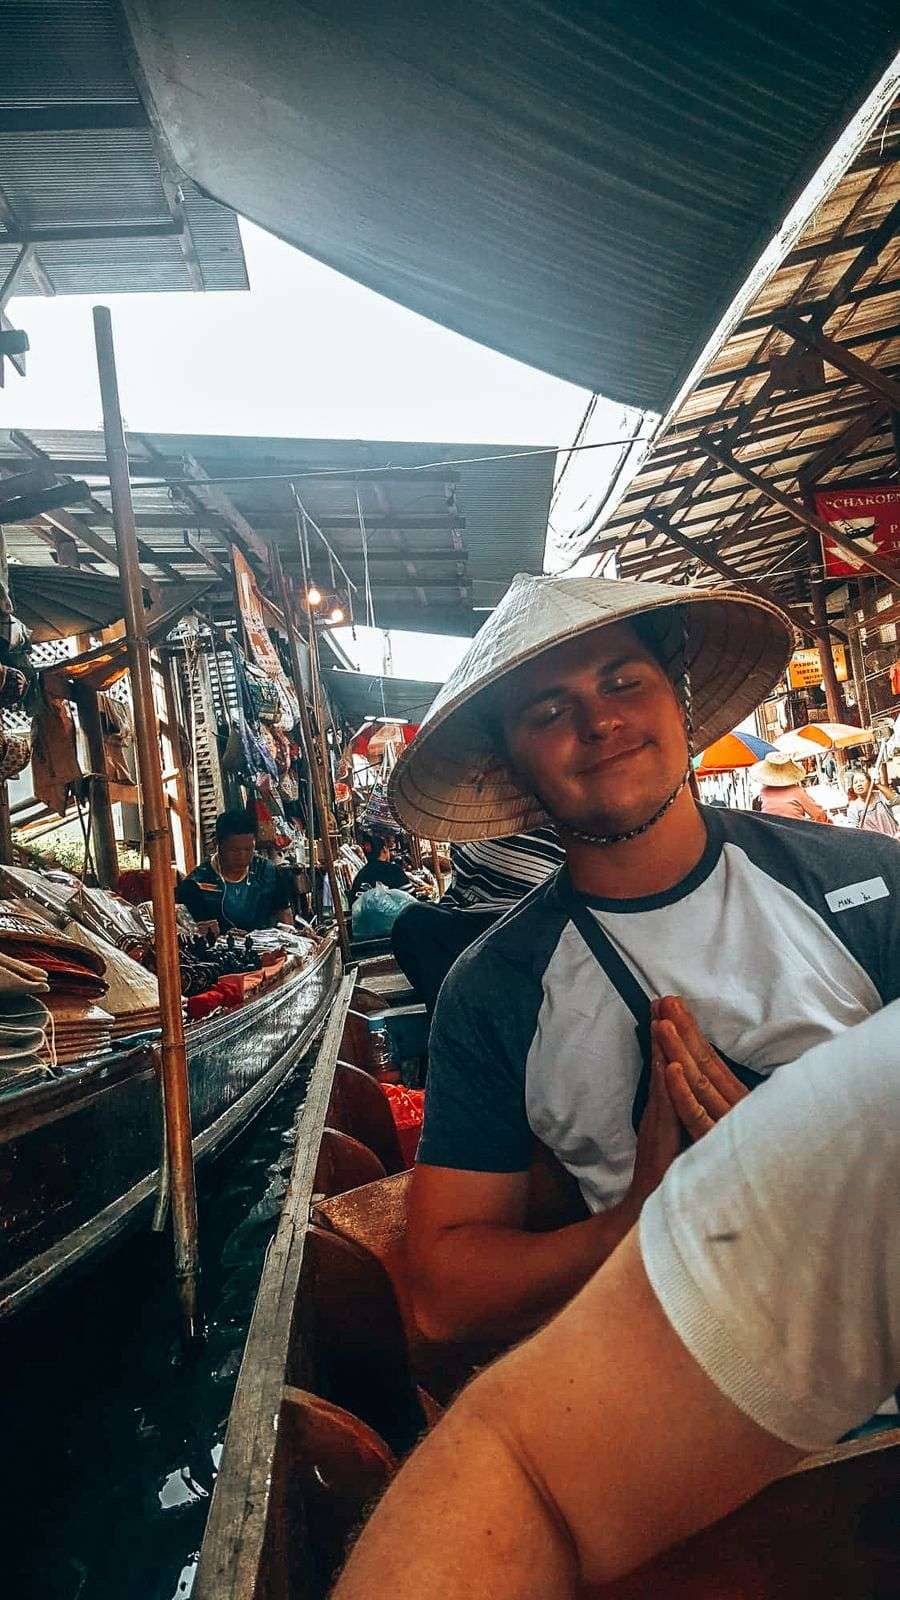 Another tip for Thailand is to visit a local market.